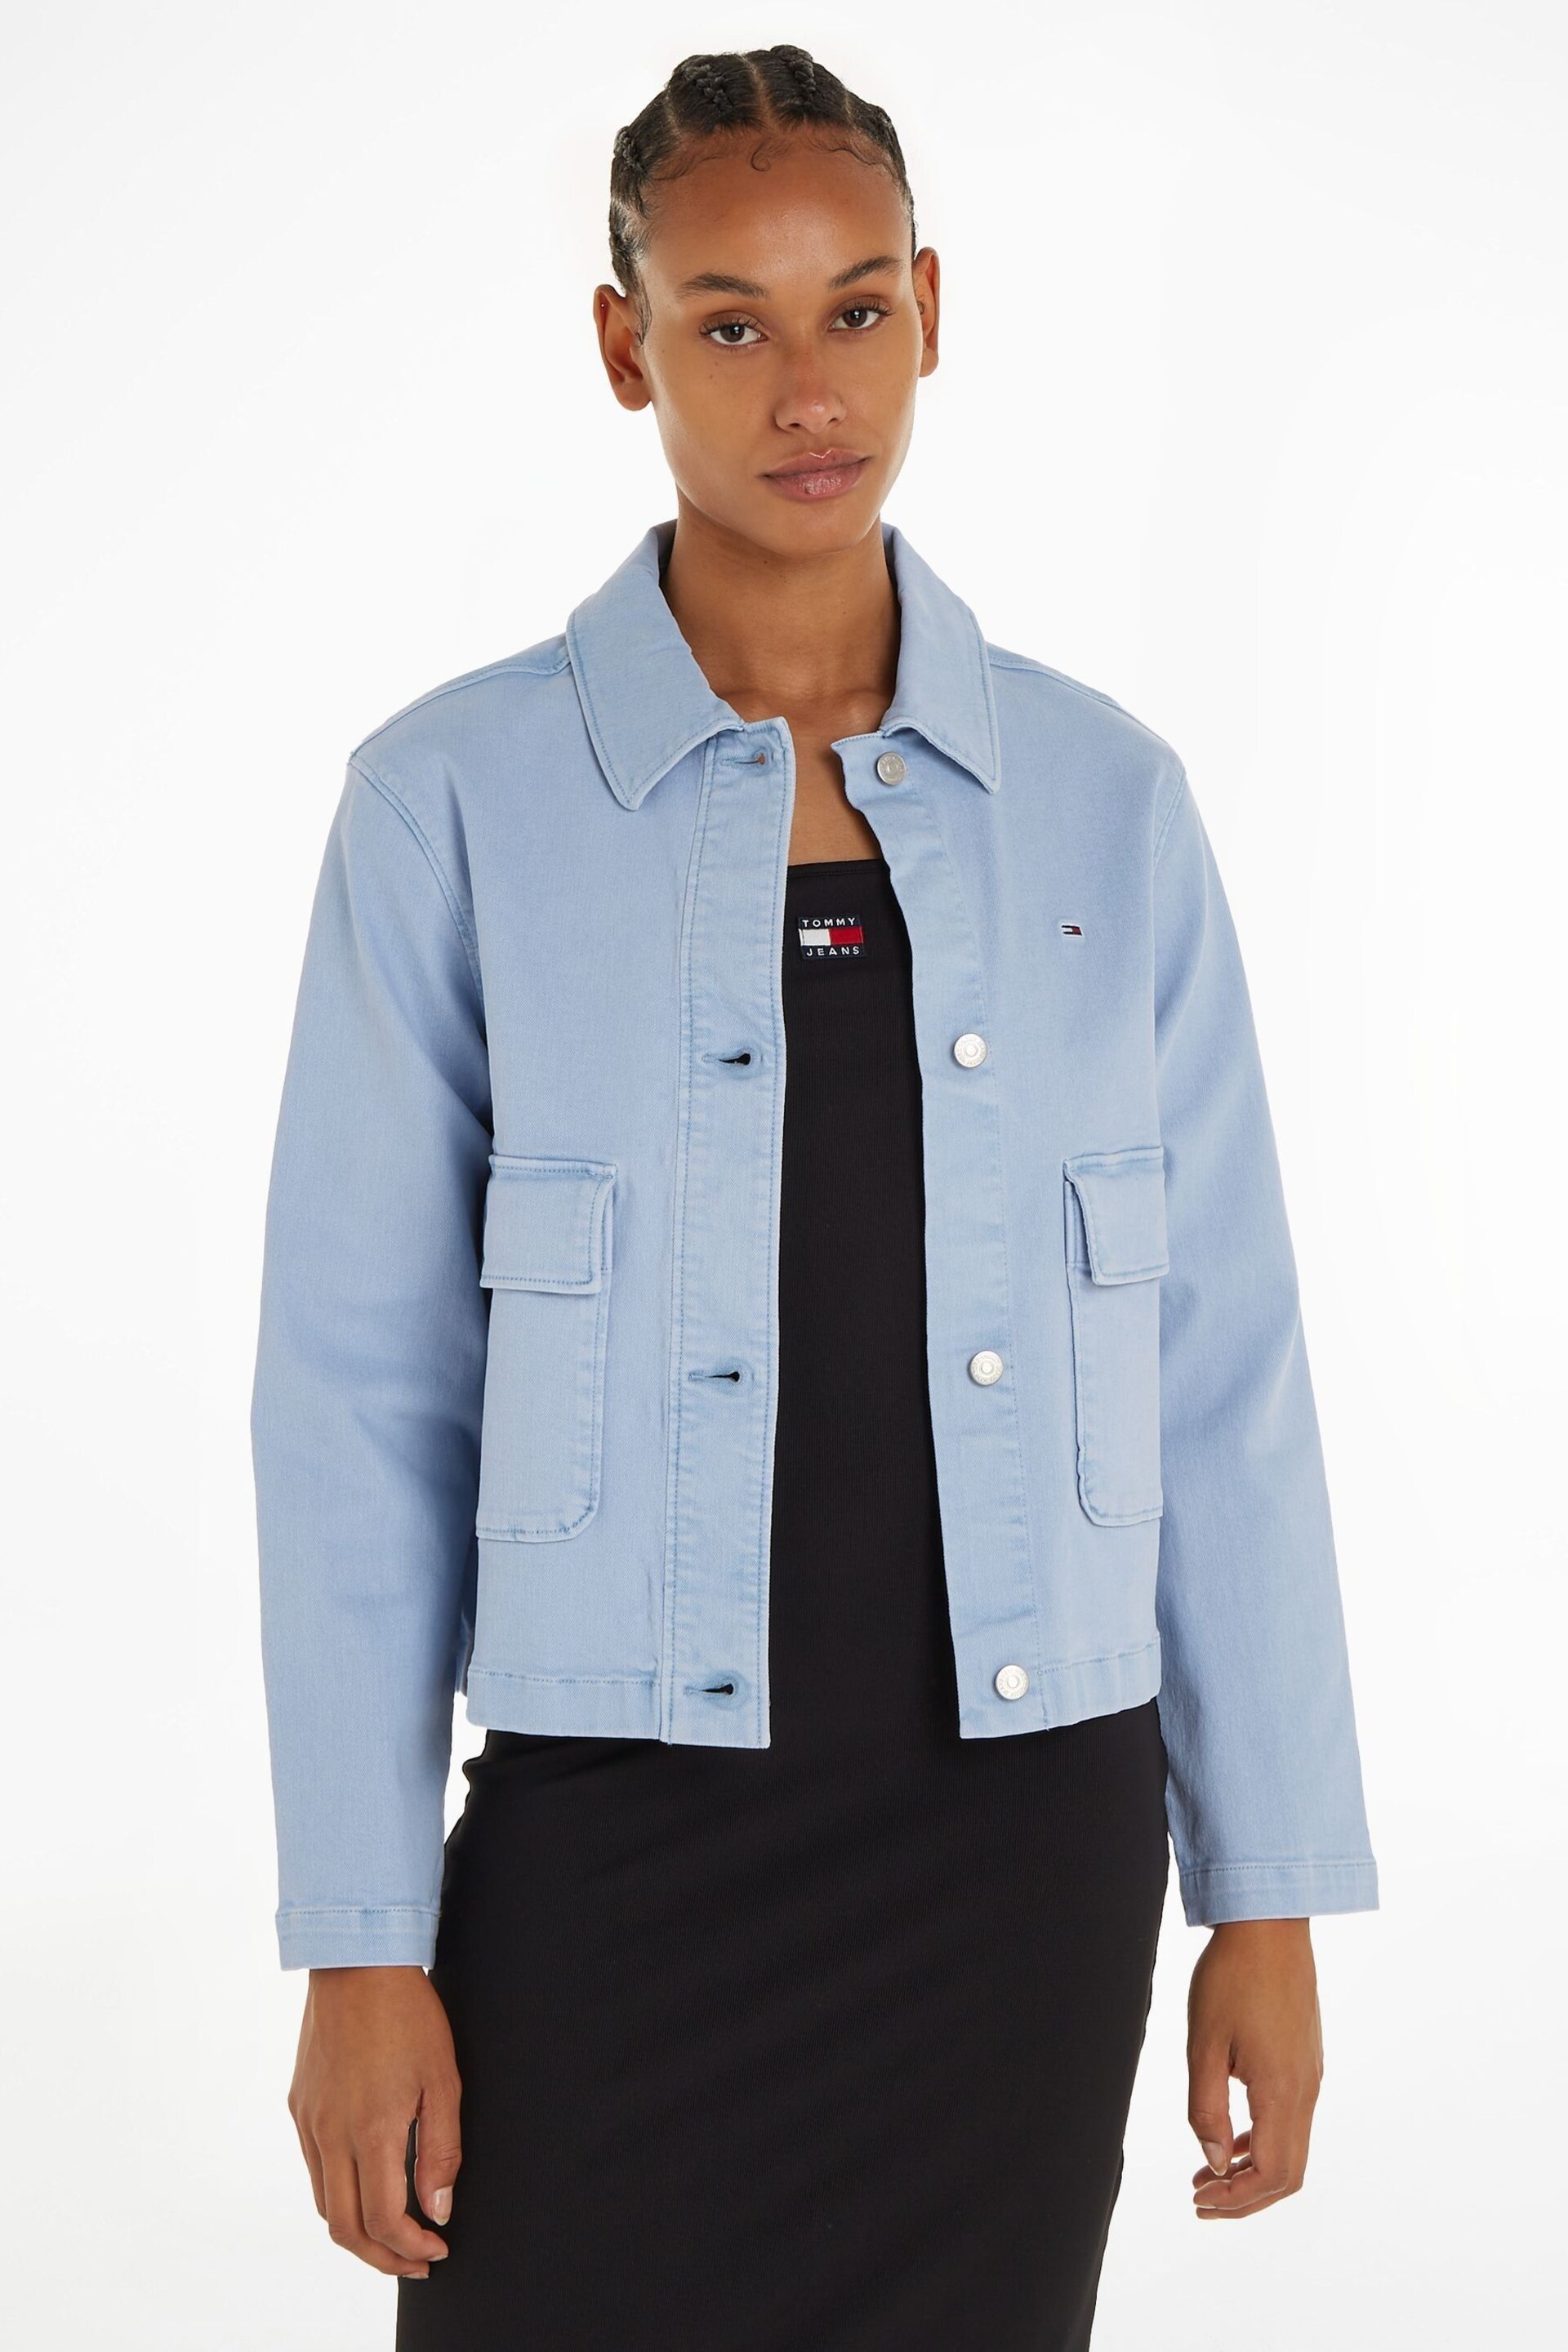 Tommy Jeans Cotton Blue Jacket - Image 1 of 6